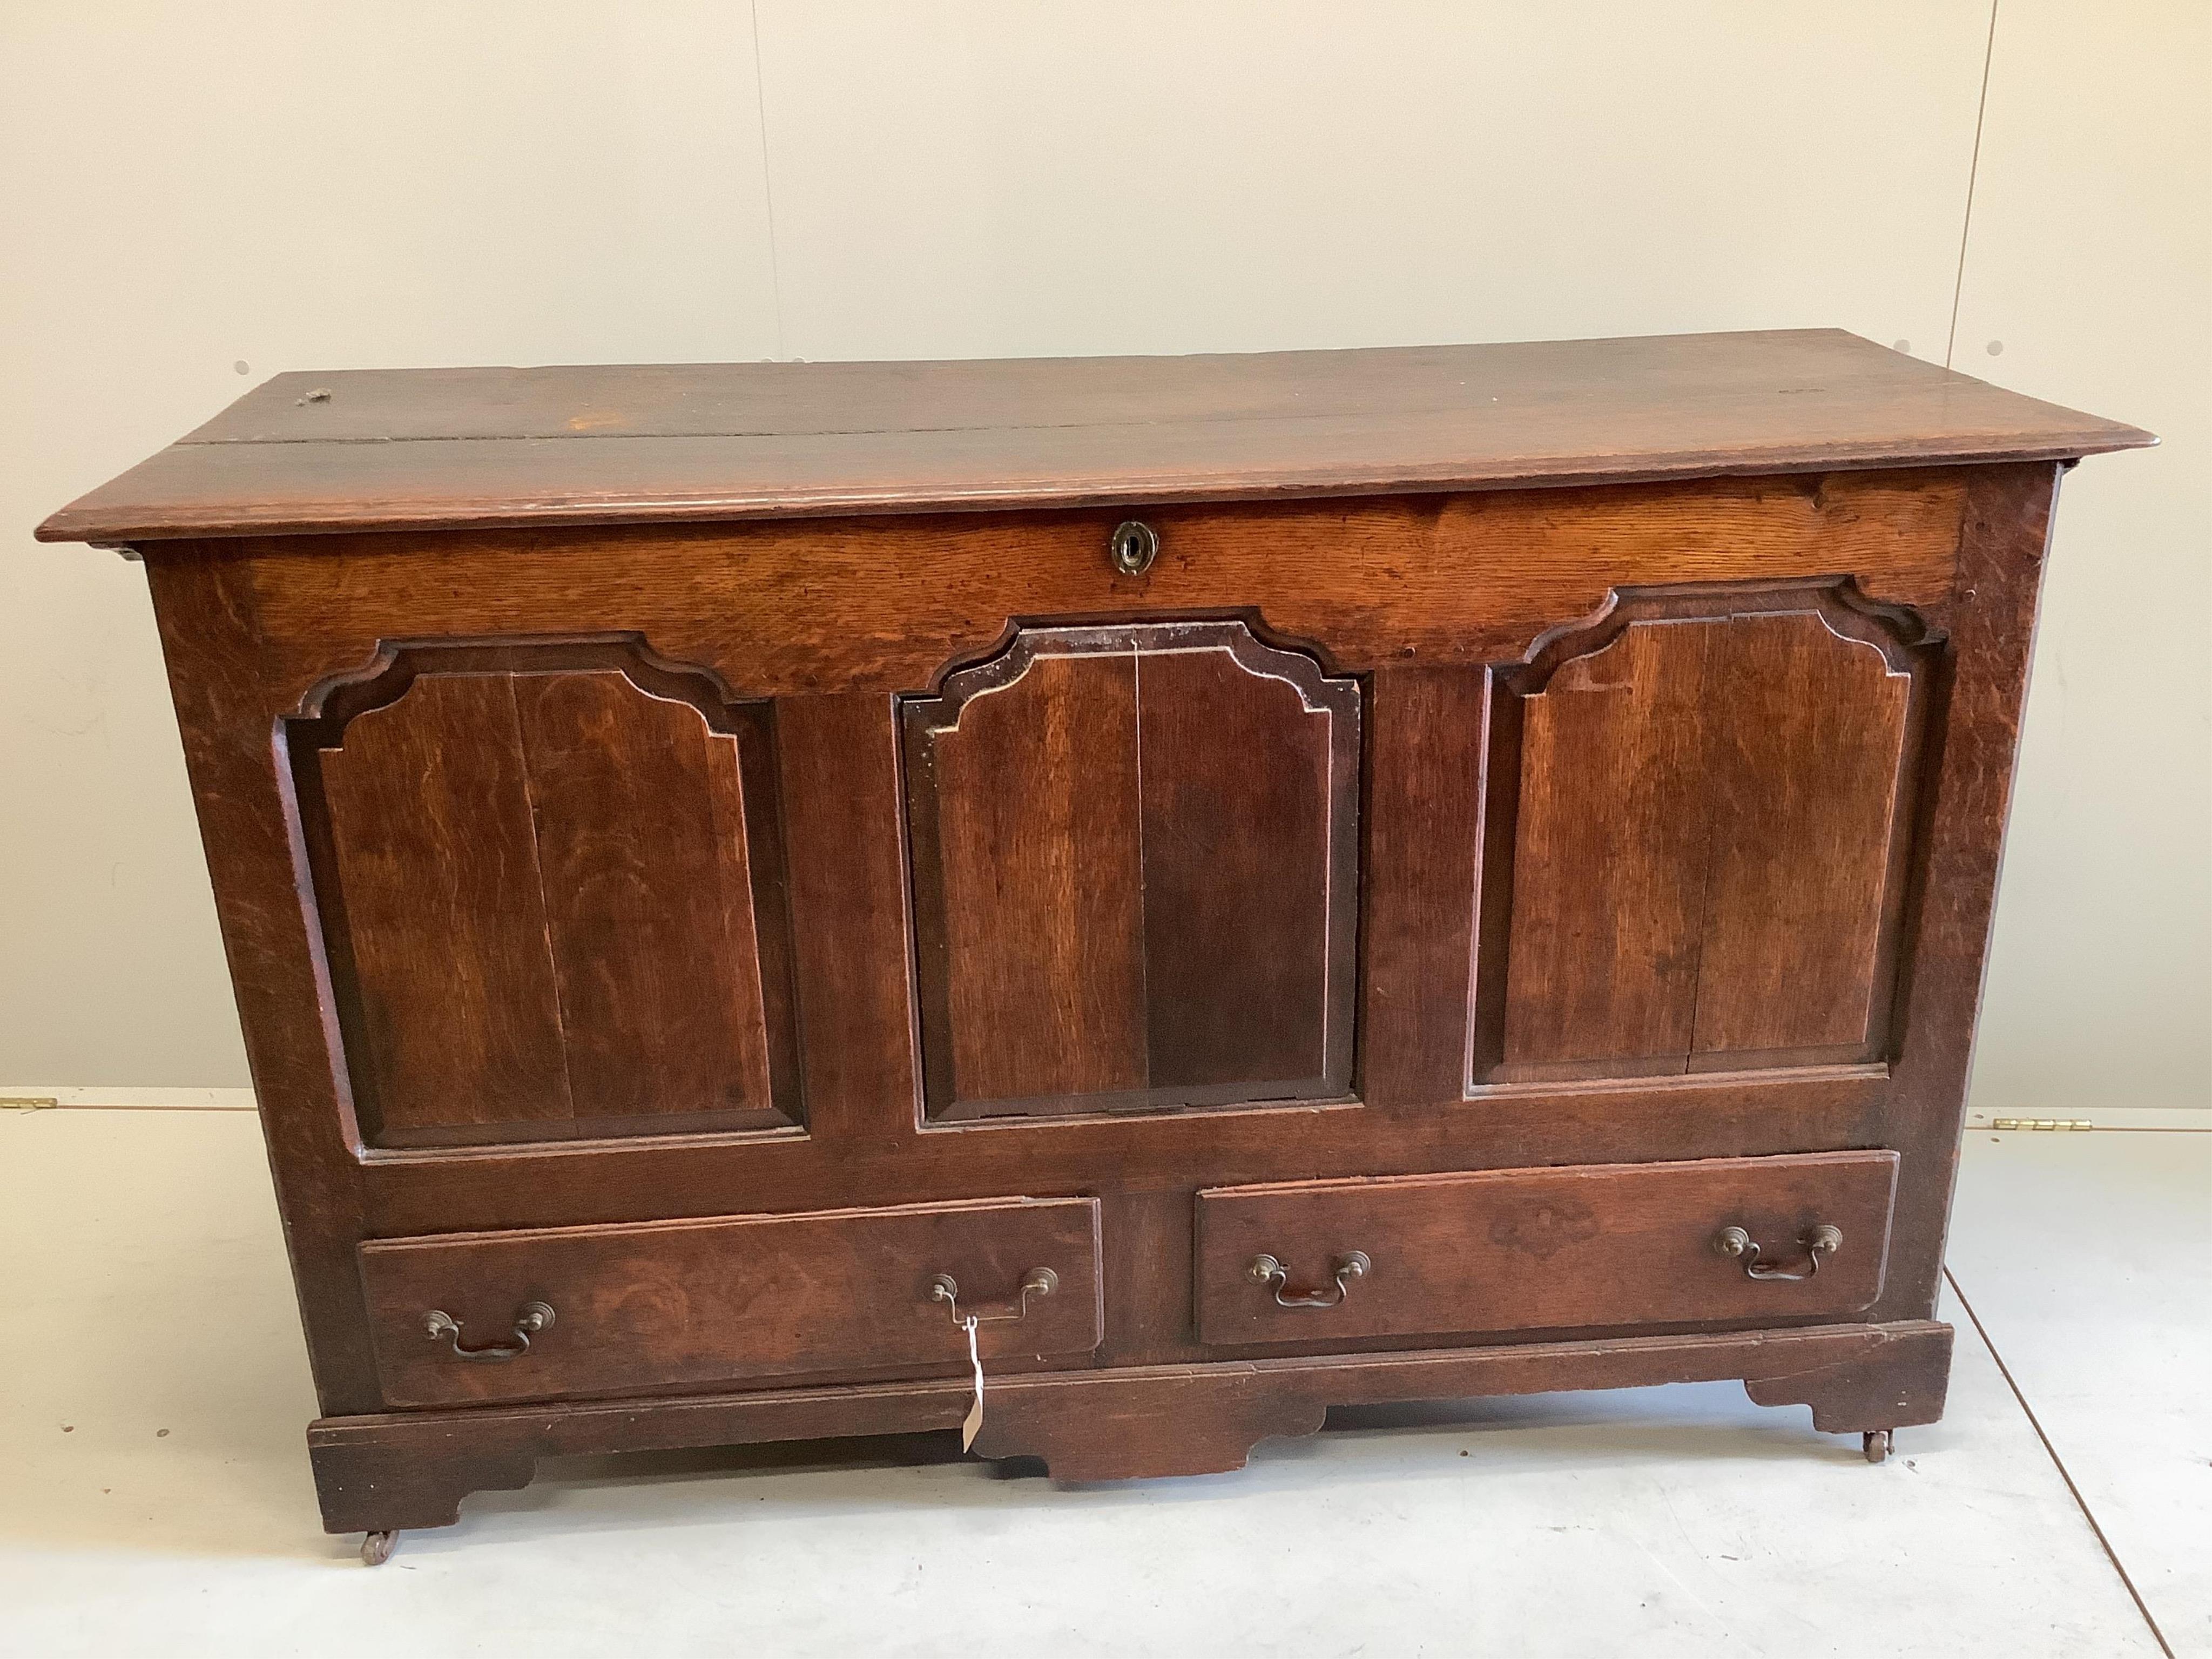 An 18th century panelled oak mule chest, adapted, width 152cm, depth 54cm, height 92cm. Condition - fair